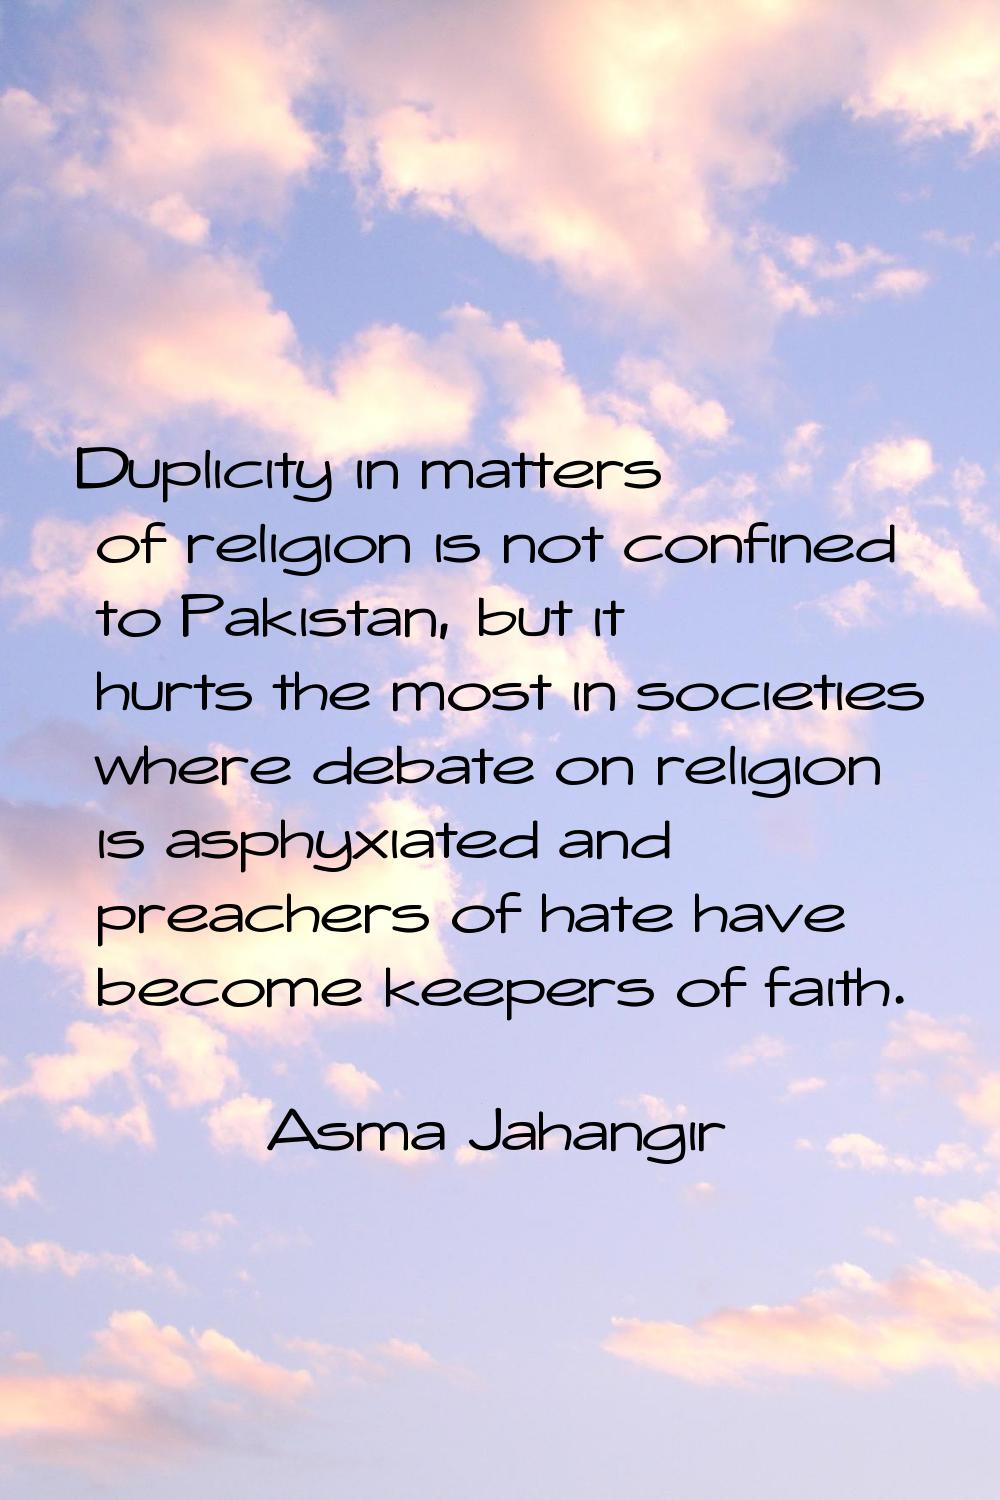 Duplicity in matters of religion is not confined to Pakistan, but it hurts the most in societies wh